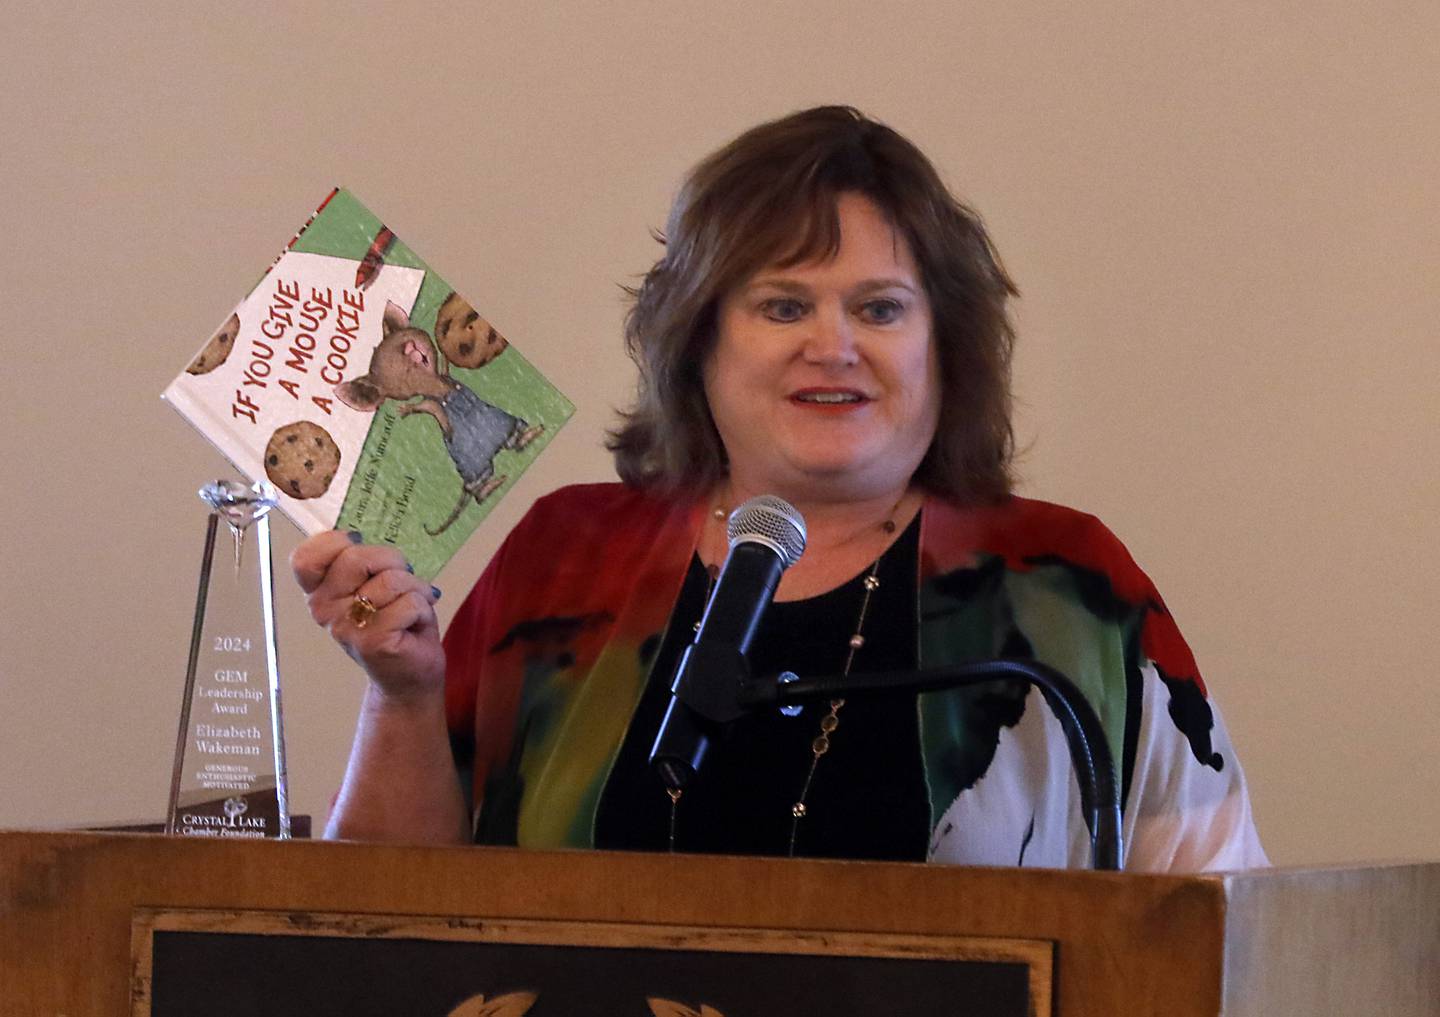 GEM award winner Elizabeth Felt Wakeman holds up the book “If You Give A Mouse a Cookie” during her speech at the Crystal Lake Chamber Foundation's 11th Annual GEM Awards Leadership Celebration on April 18, 2024, at the Boulder Ridge Country Club in Lake in the Hills. This year's award winners are Elizabeth Wakeman, of Wakeman Law Group, PC.; Randy Smith, of General Kinematics Corporation; and SHAW Media/The Northwest Herald.